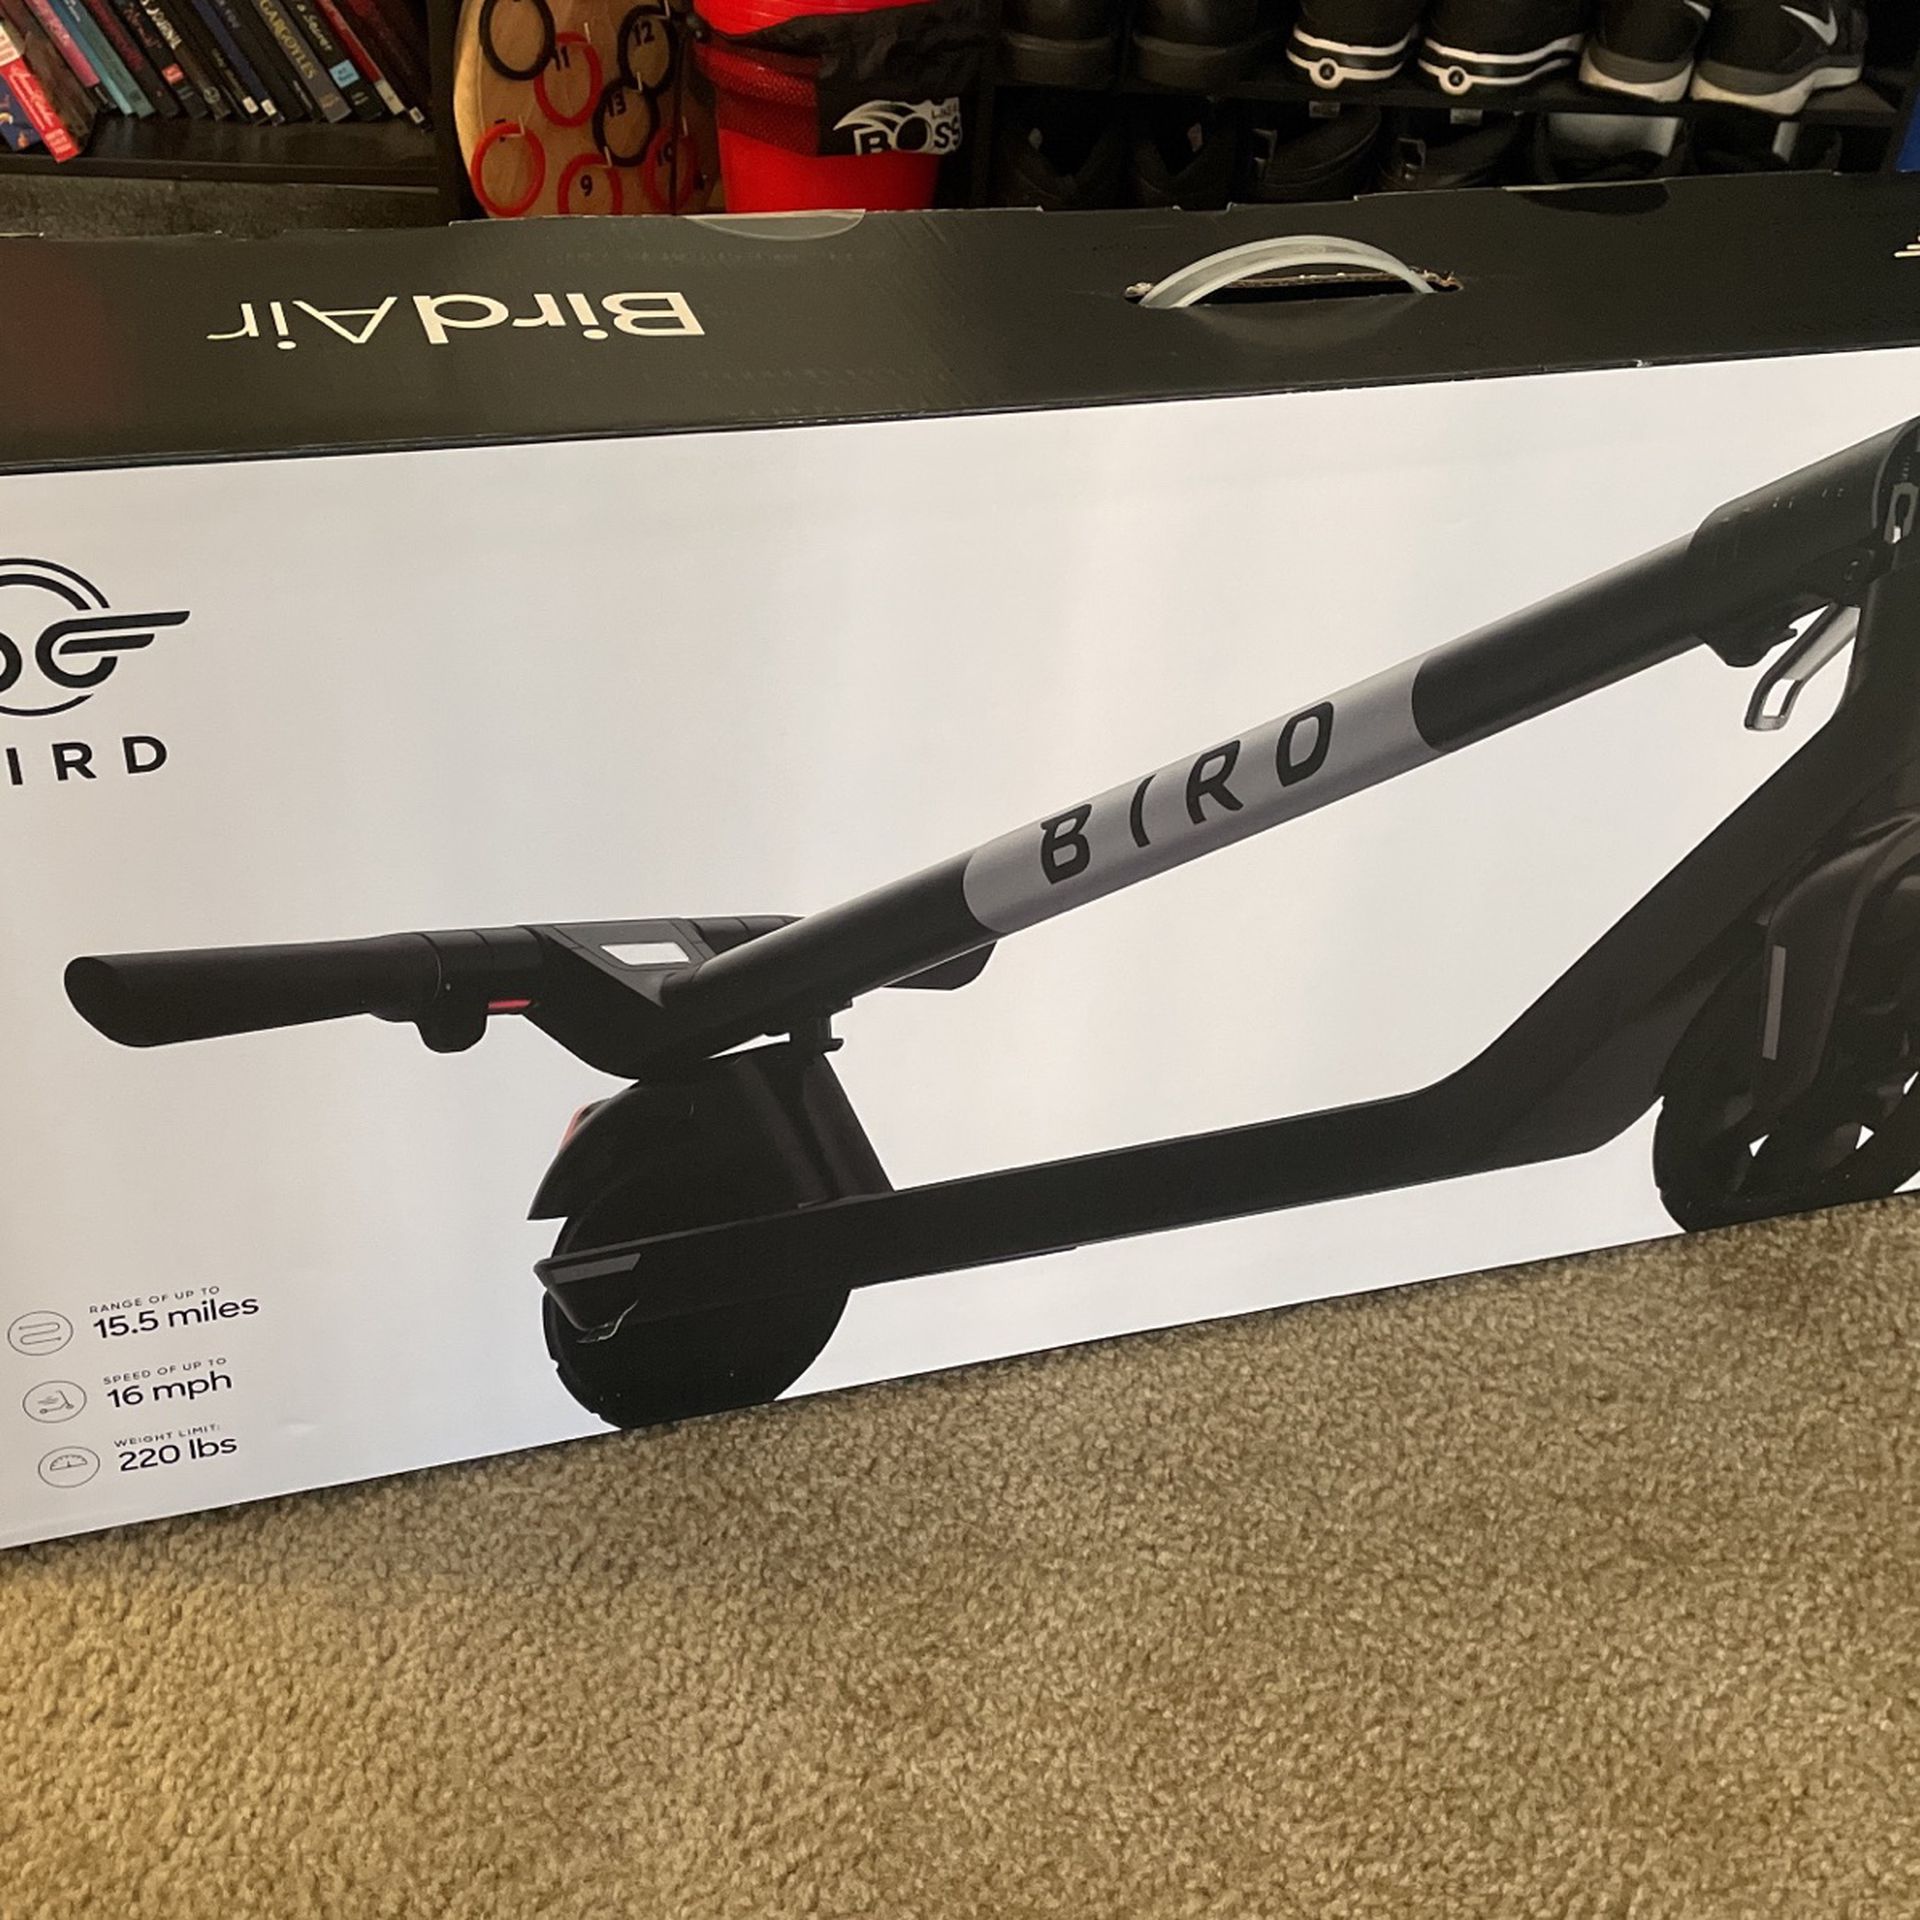 Brand New Sealed Box BIRD Air Scooter!